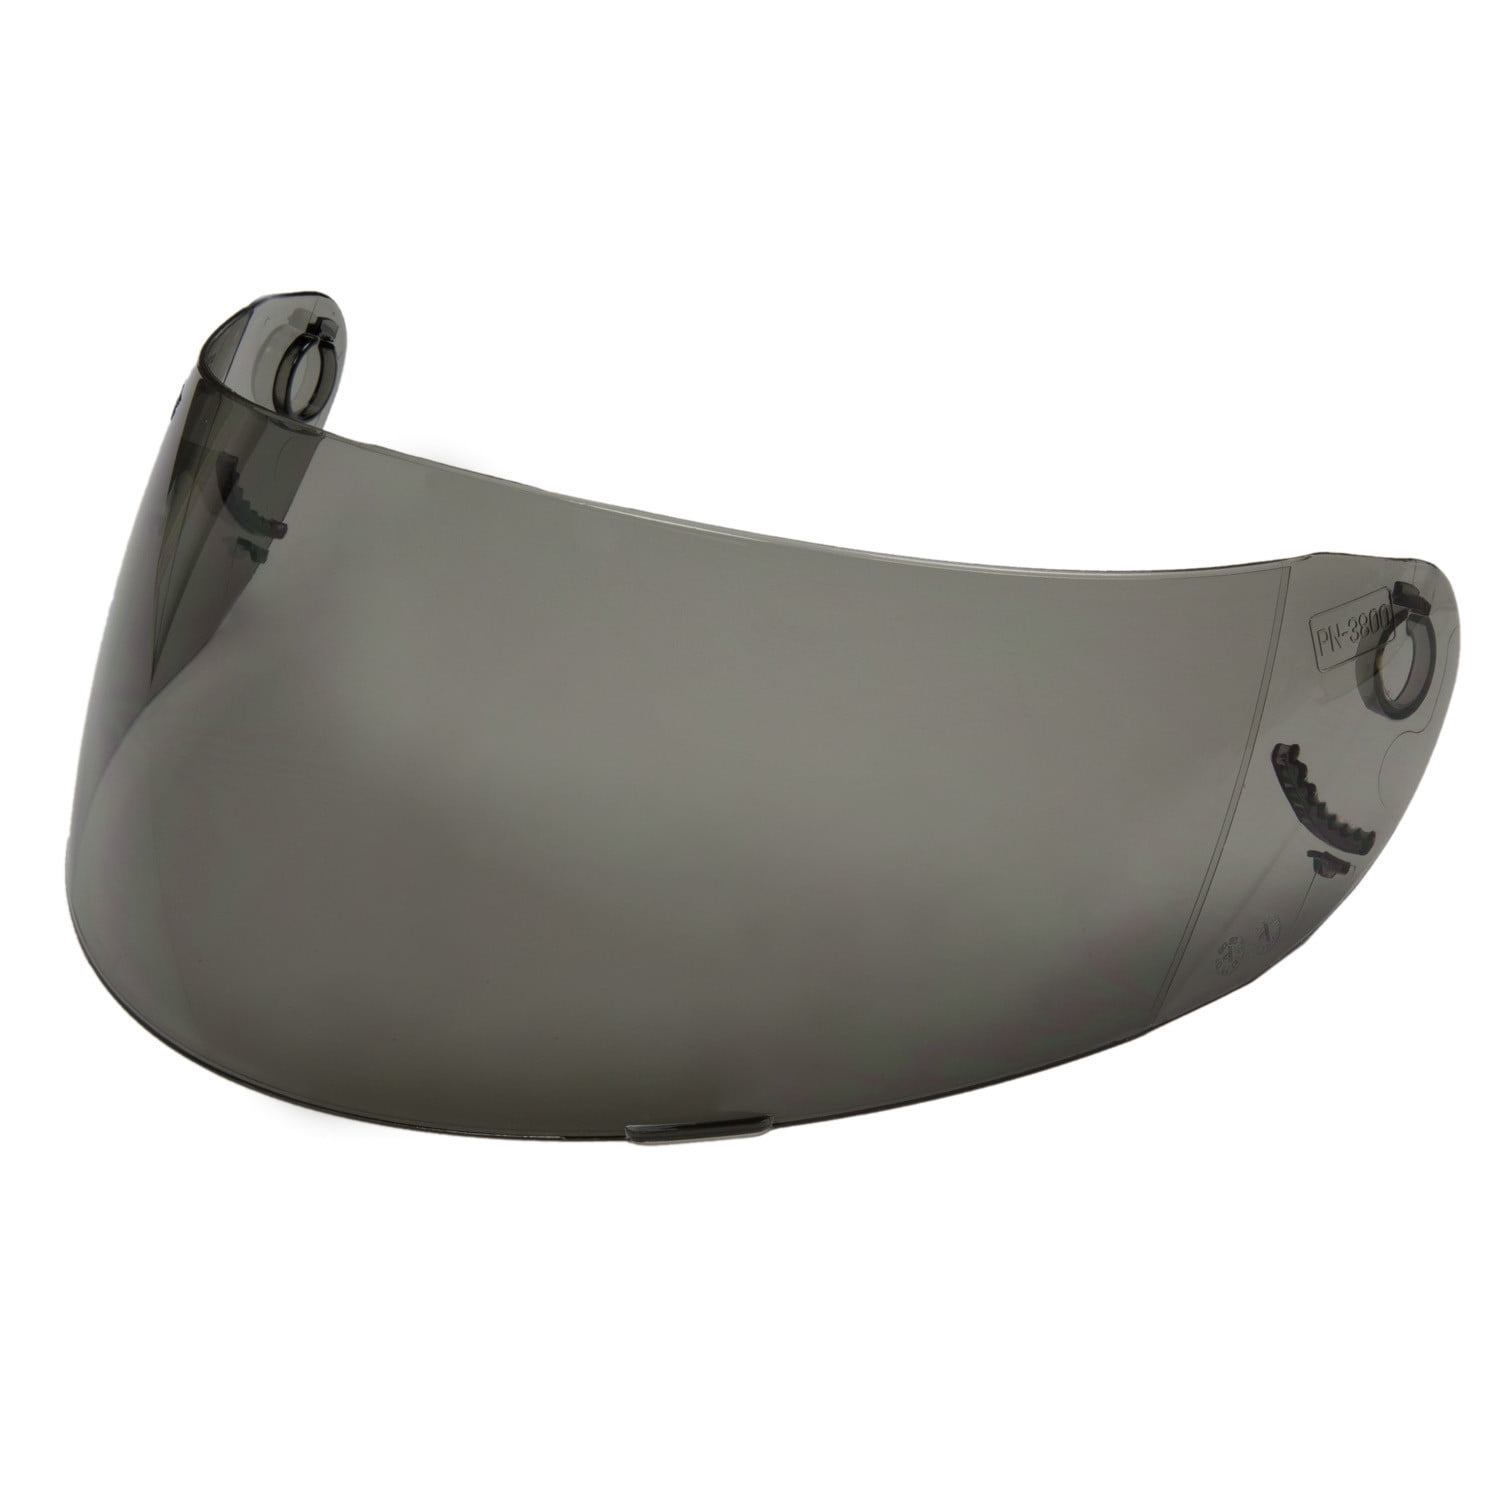 Fulmer Helmet Replacement Face Shield Visor Dark Smoke Tinted for AF-M and S7 